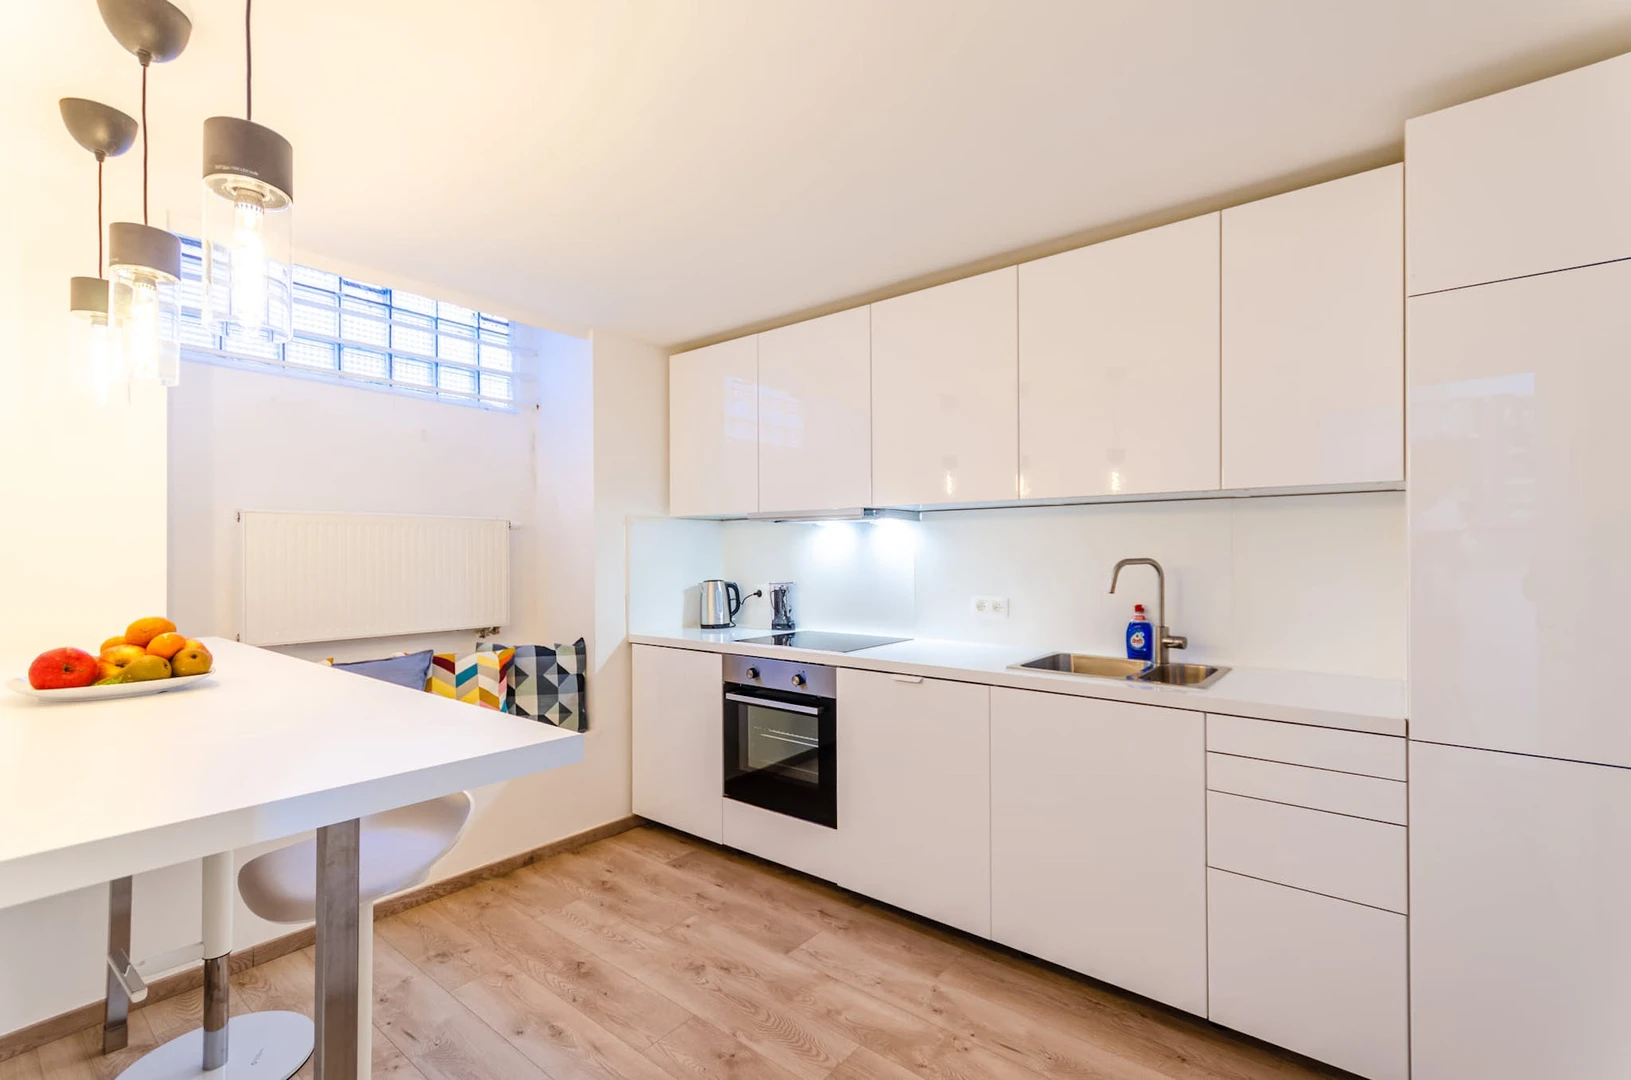 Renting rooms by the month in Bruxelles/brussels